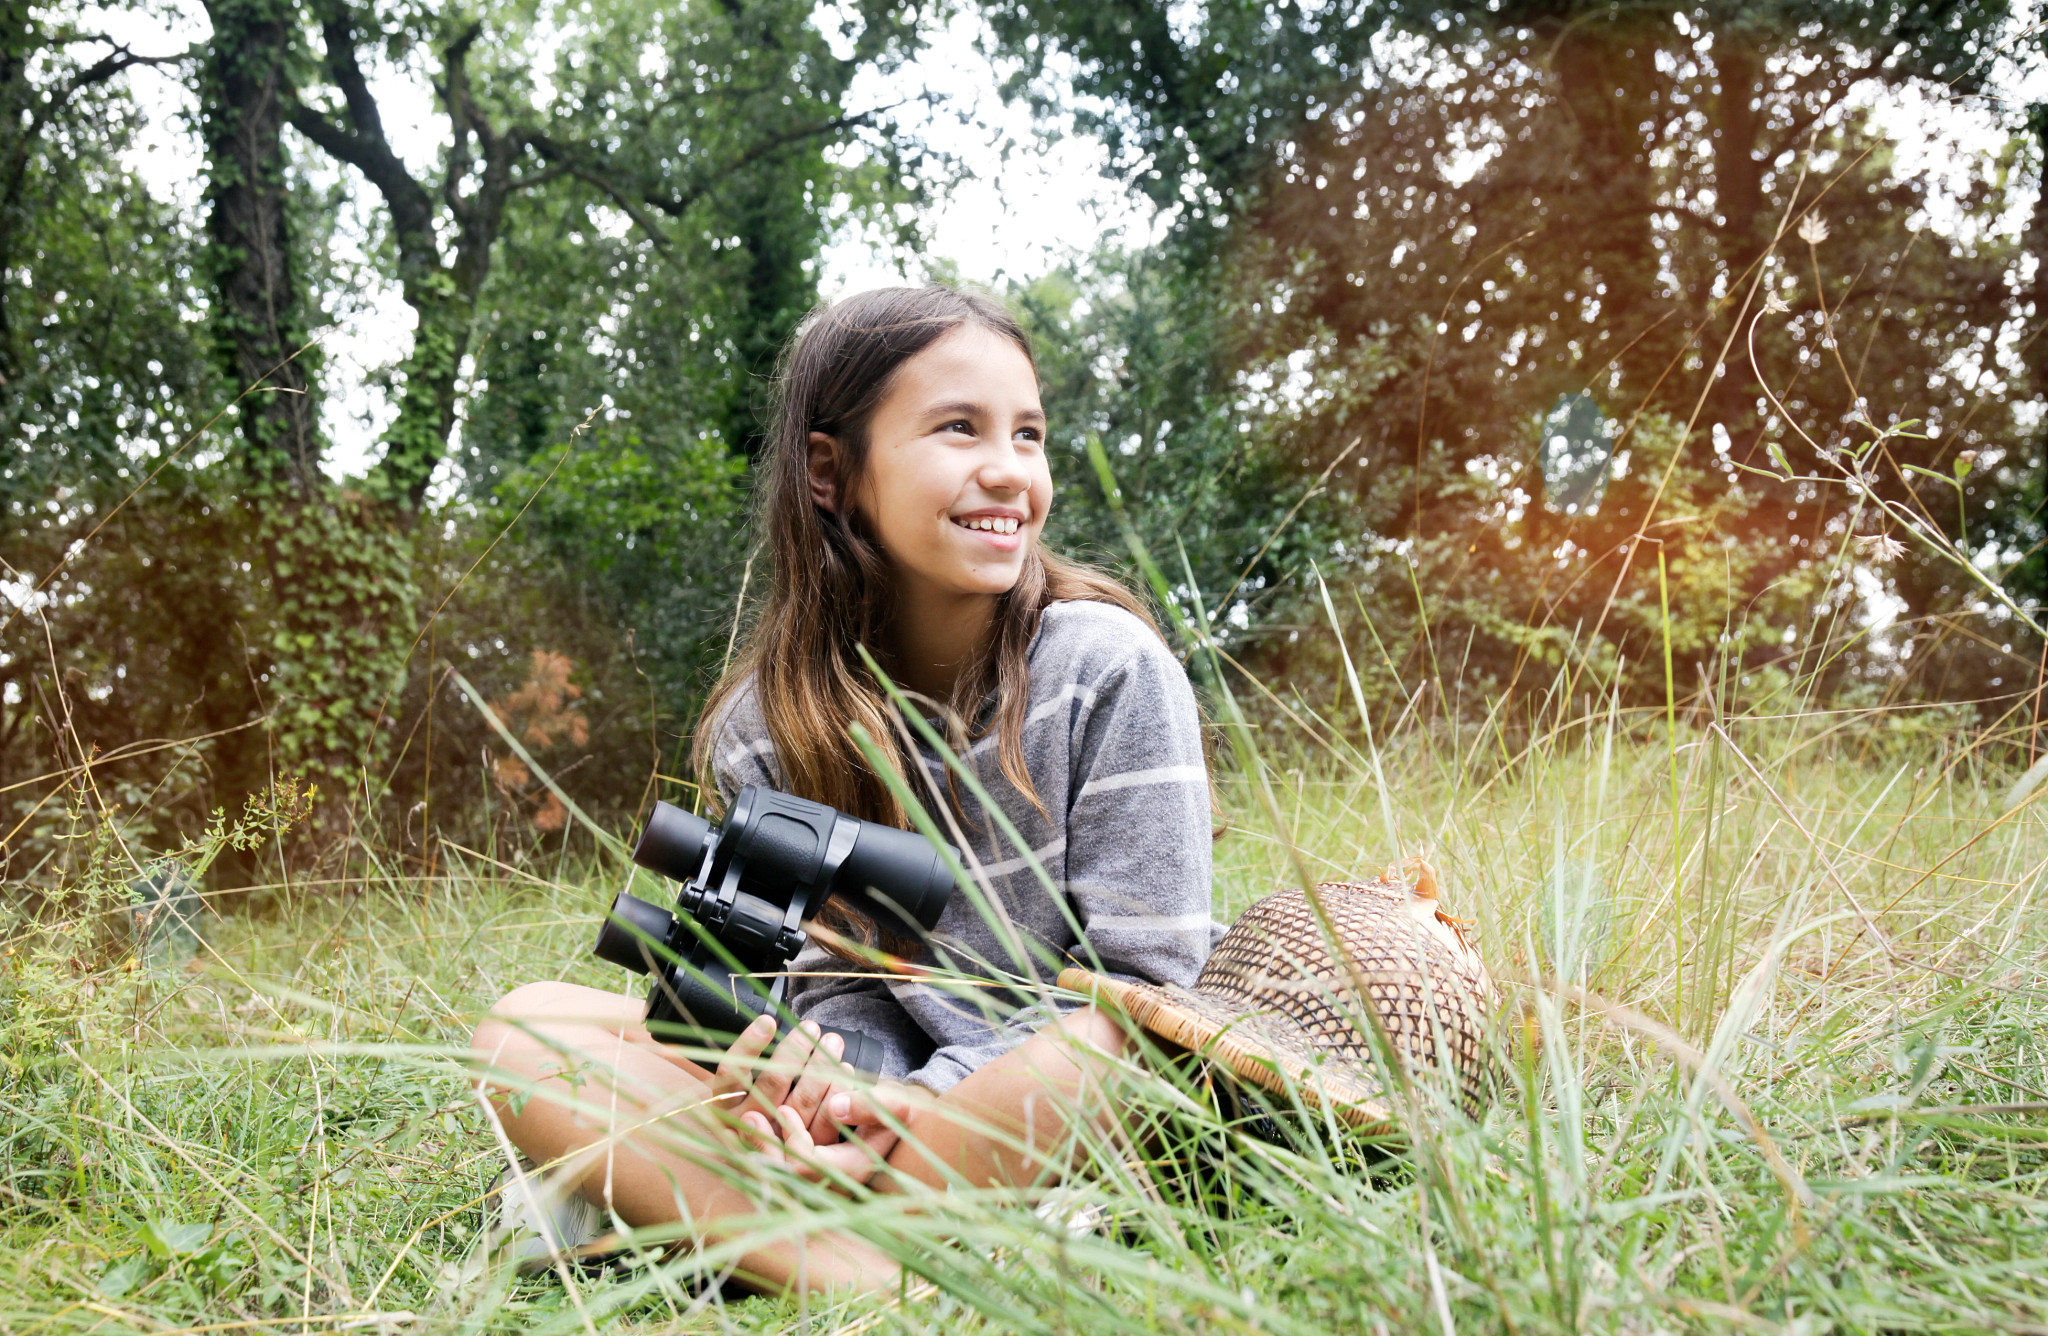 A young girl with long brown hair sits in the grass holding binoculars and smiling into the distance. 